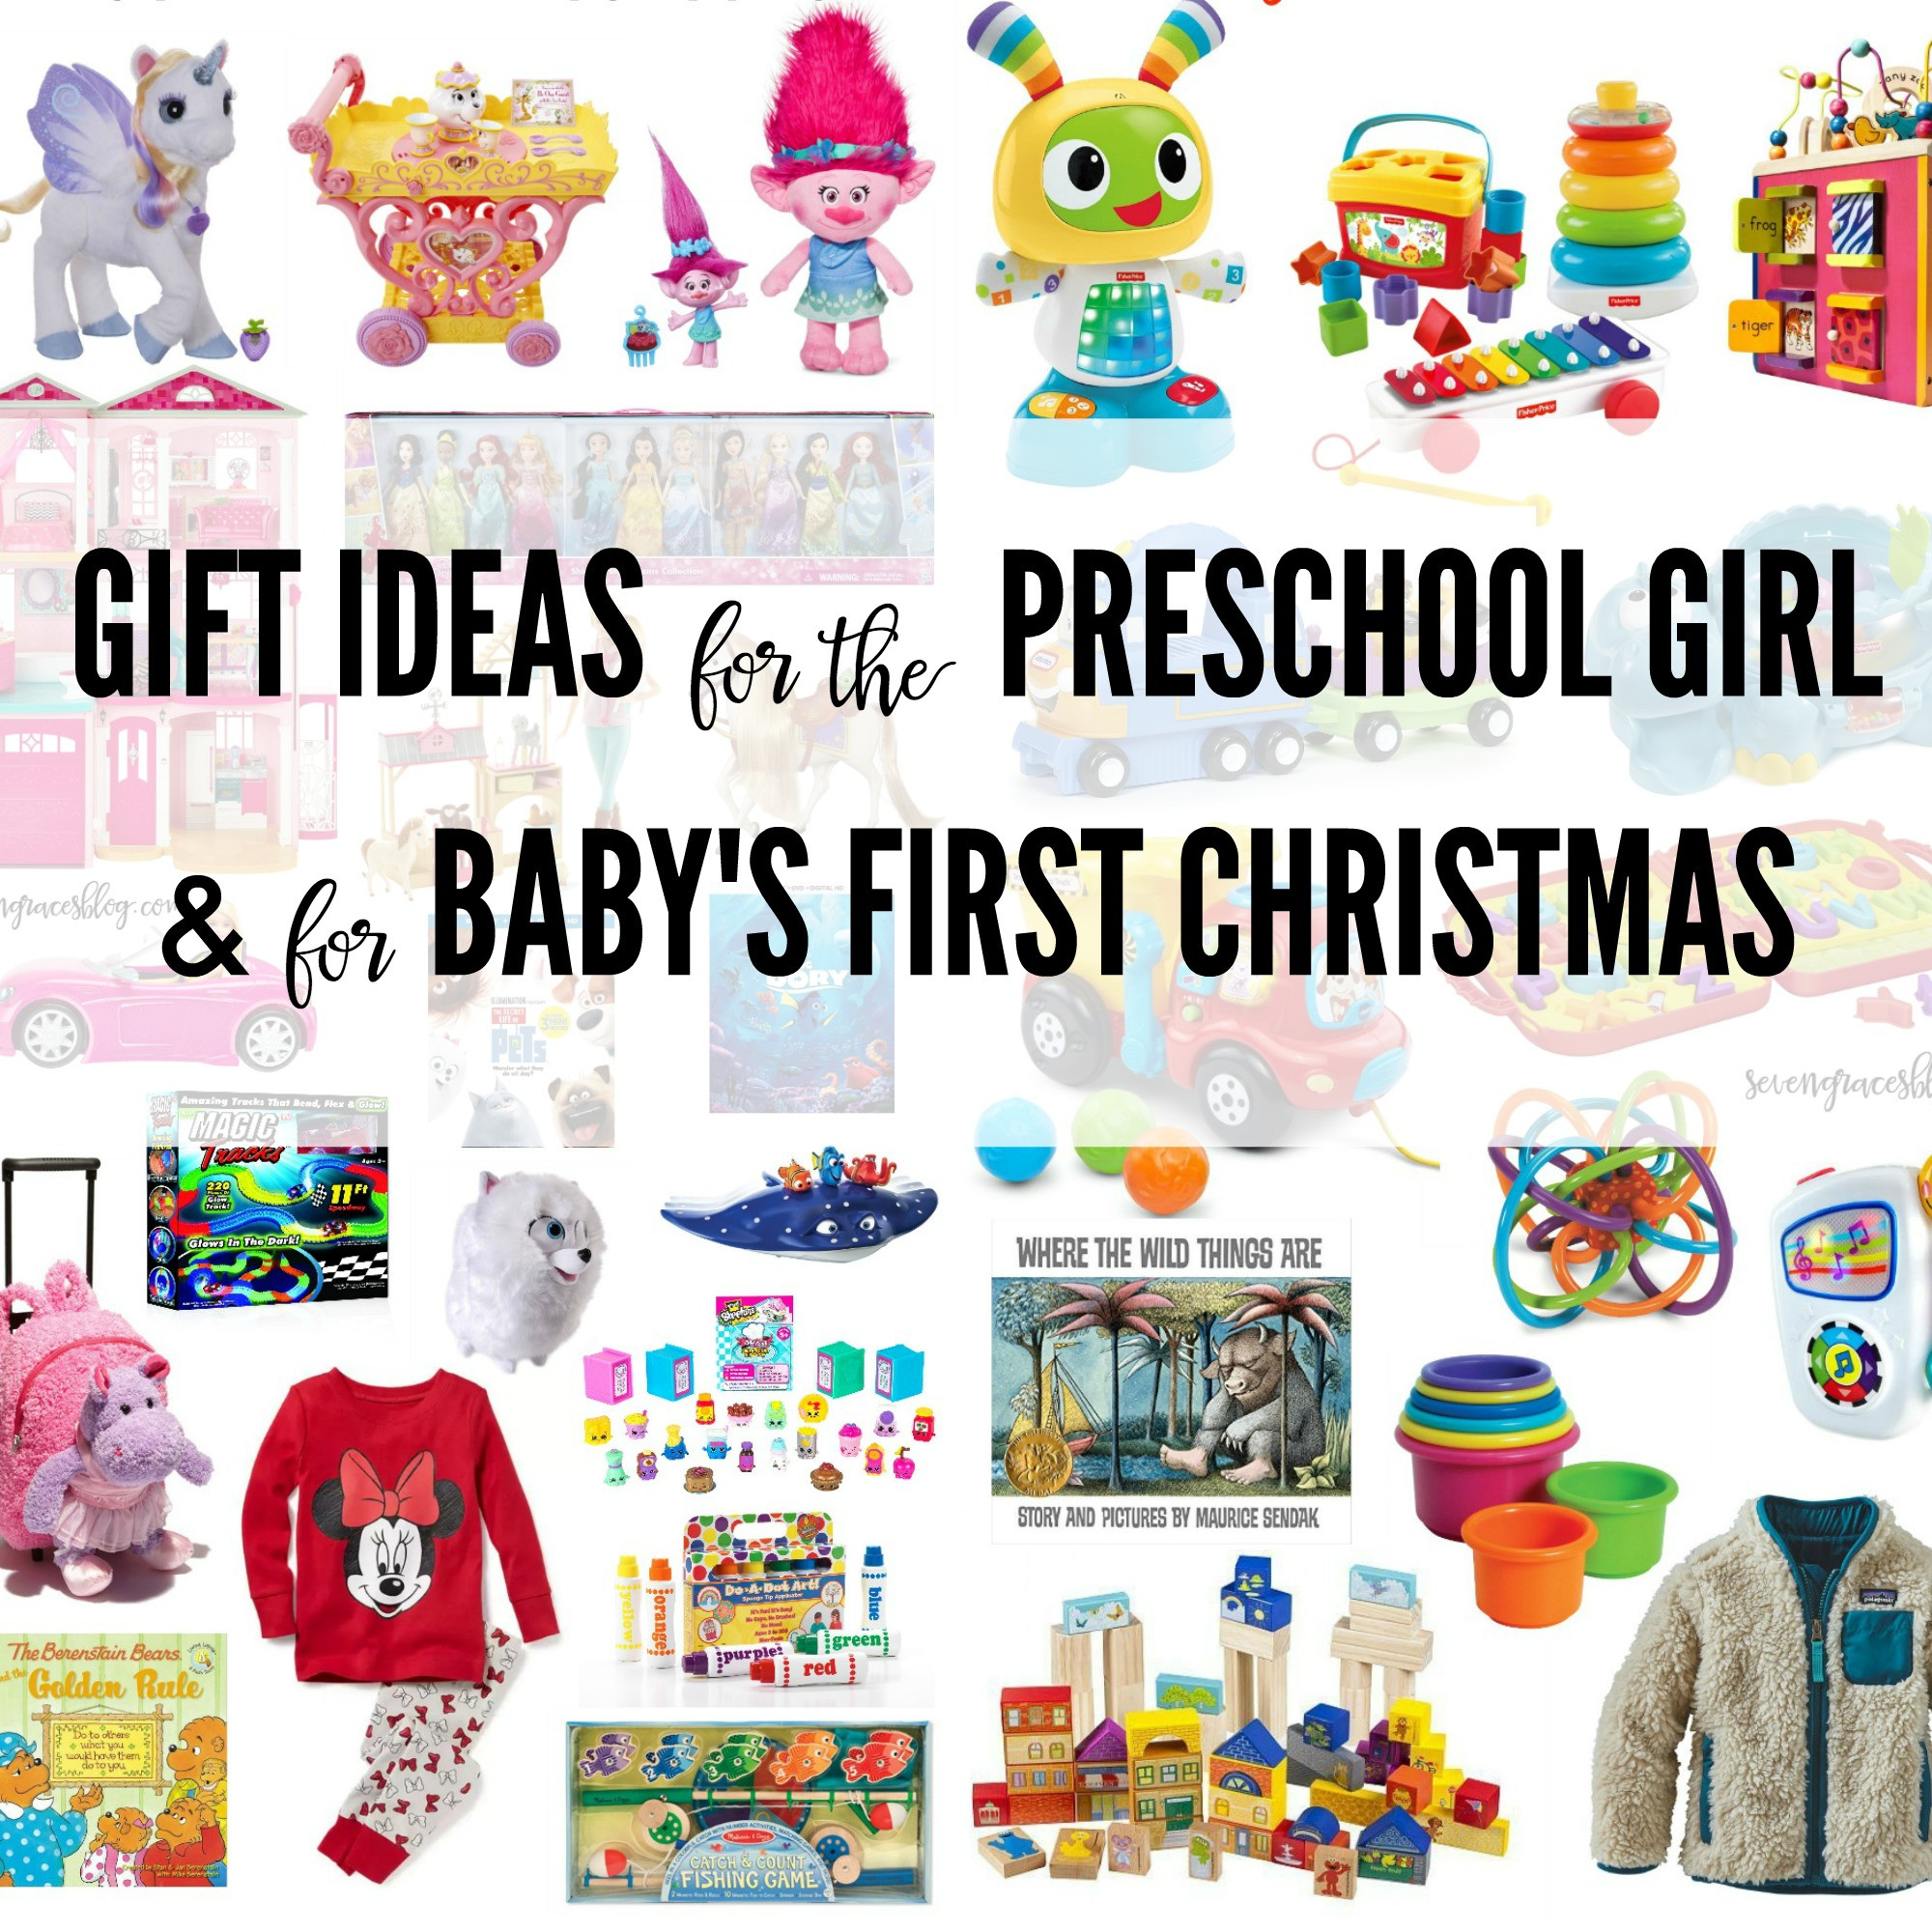 Babys First Christmas Gift Ideas
 Gift Ideas for the Preschool Girl and for Baby s First